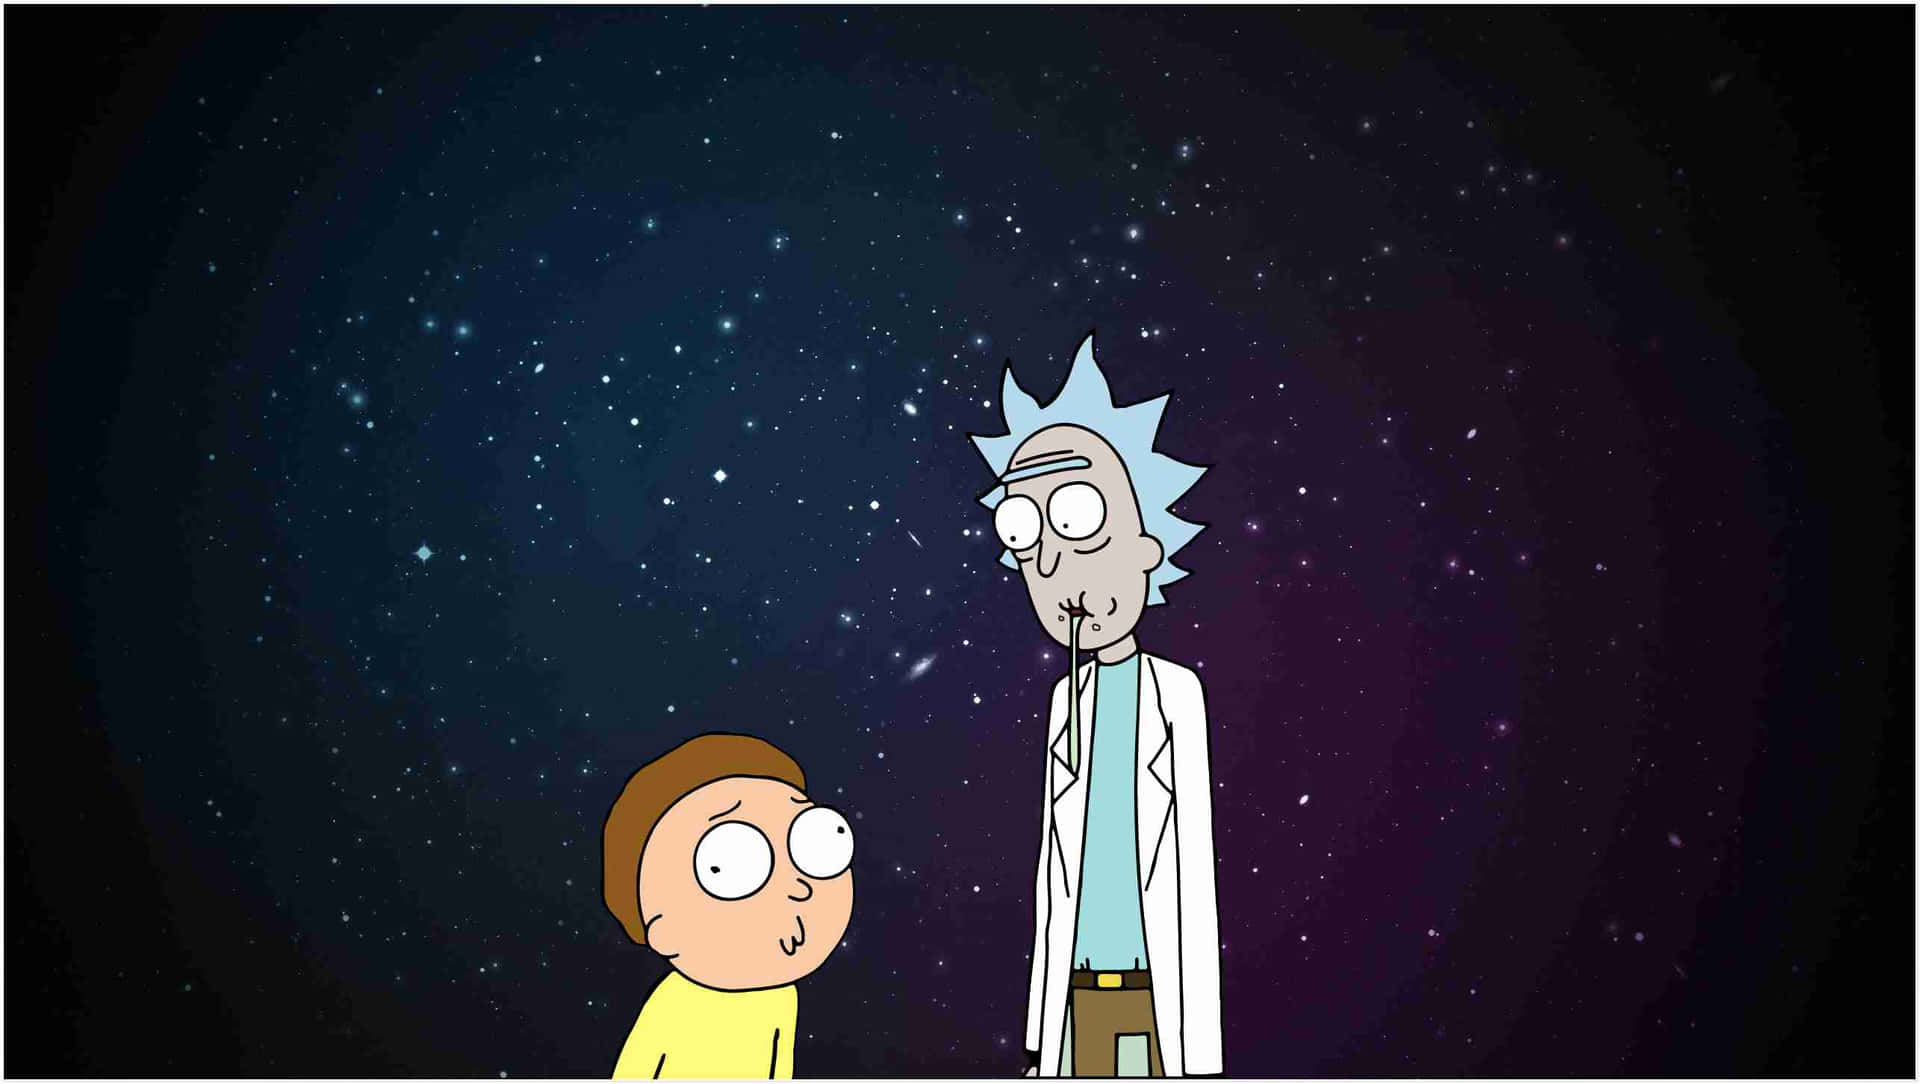 Morty Smith and his Interdimensional Misadventures Wallpaper